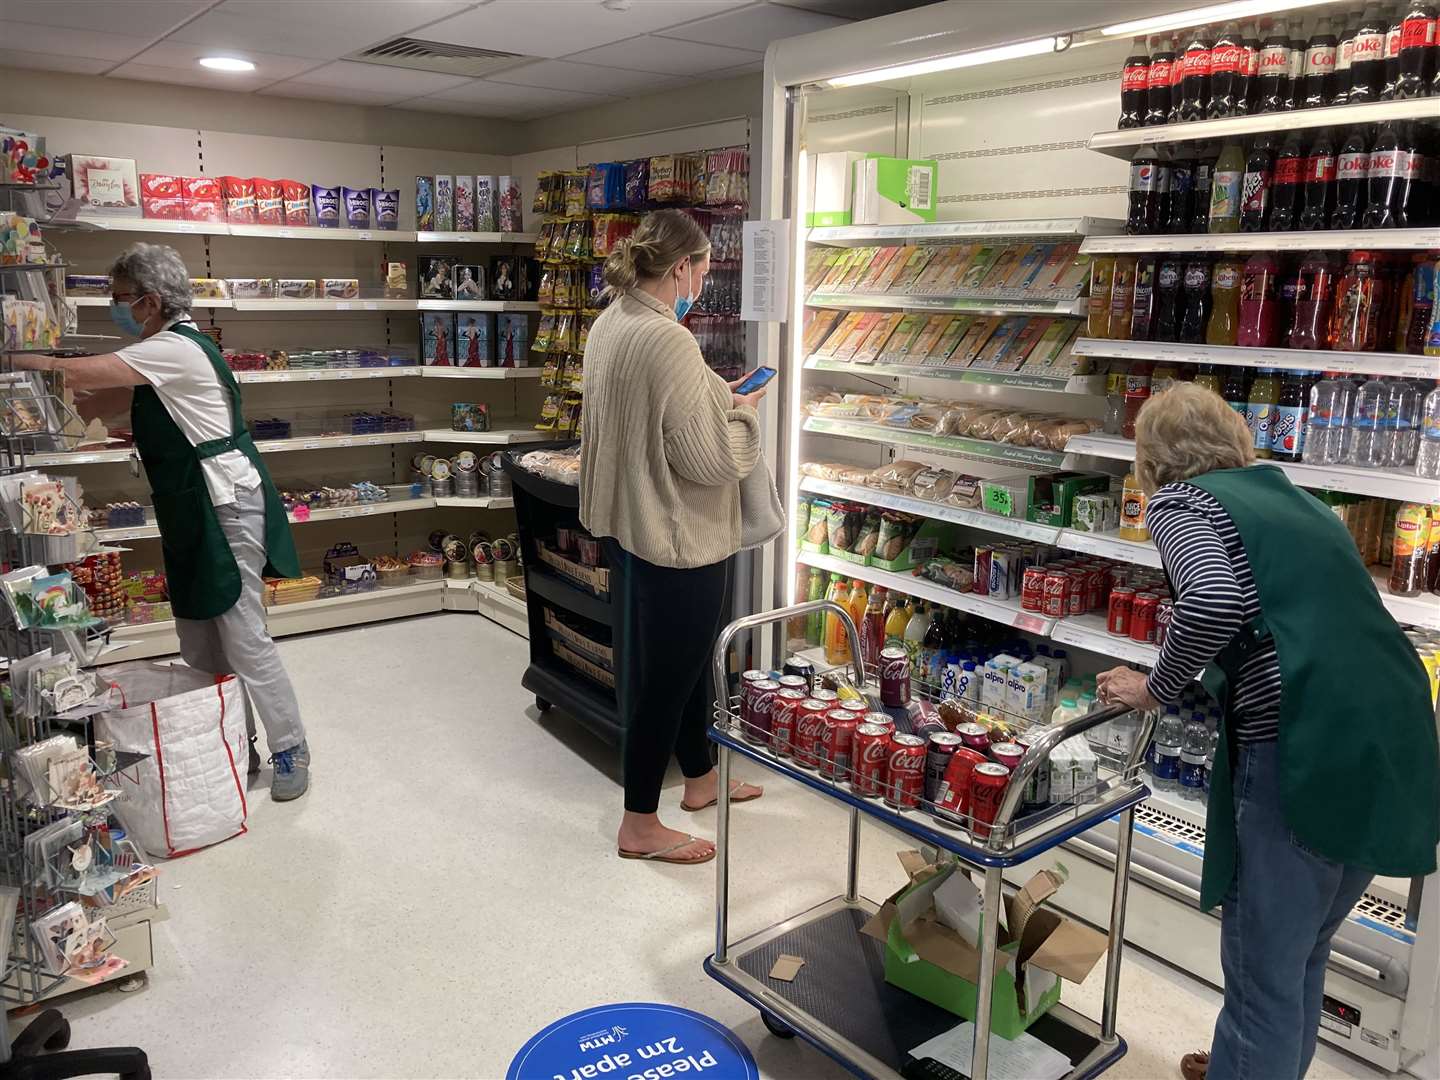 Inside the League of Friends' shop at Maidstone Hospital